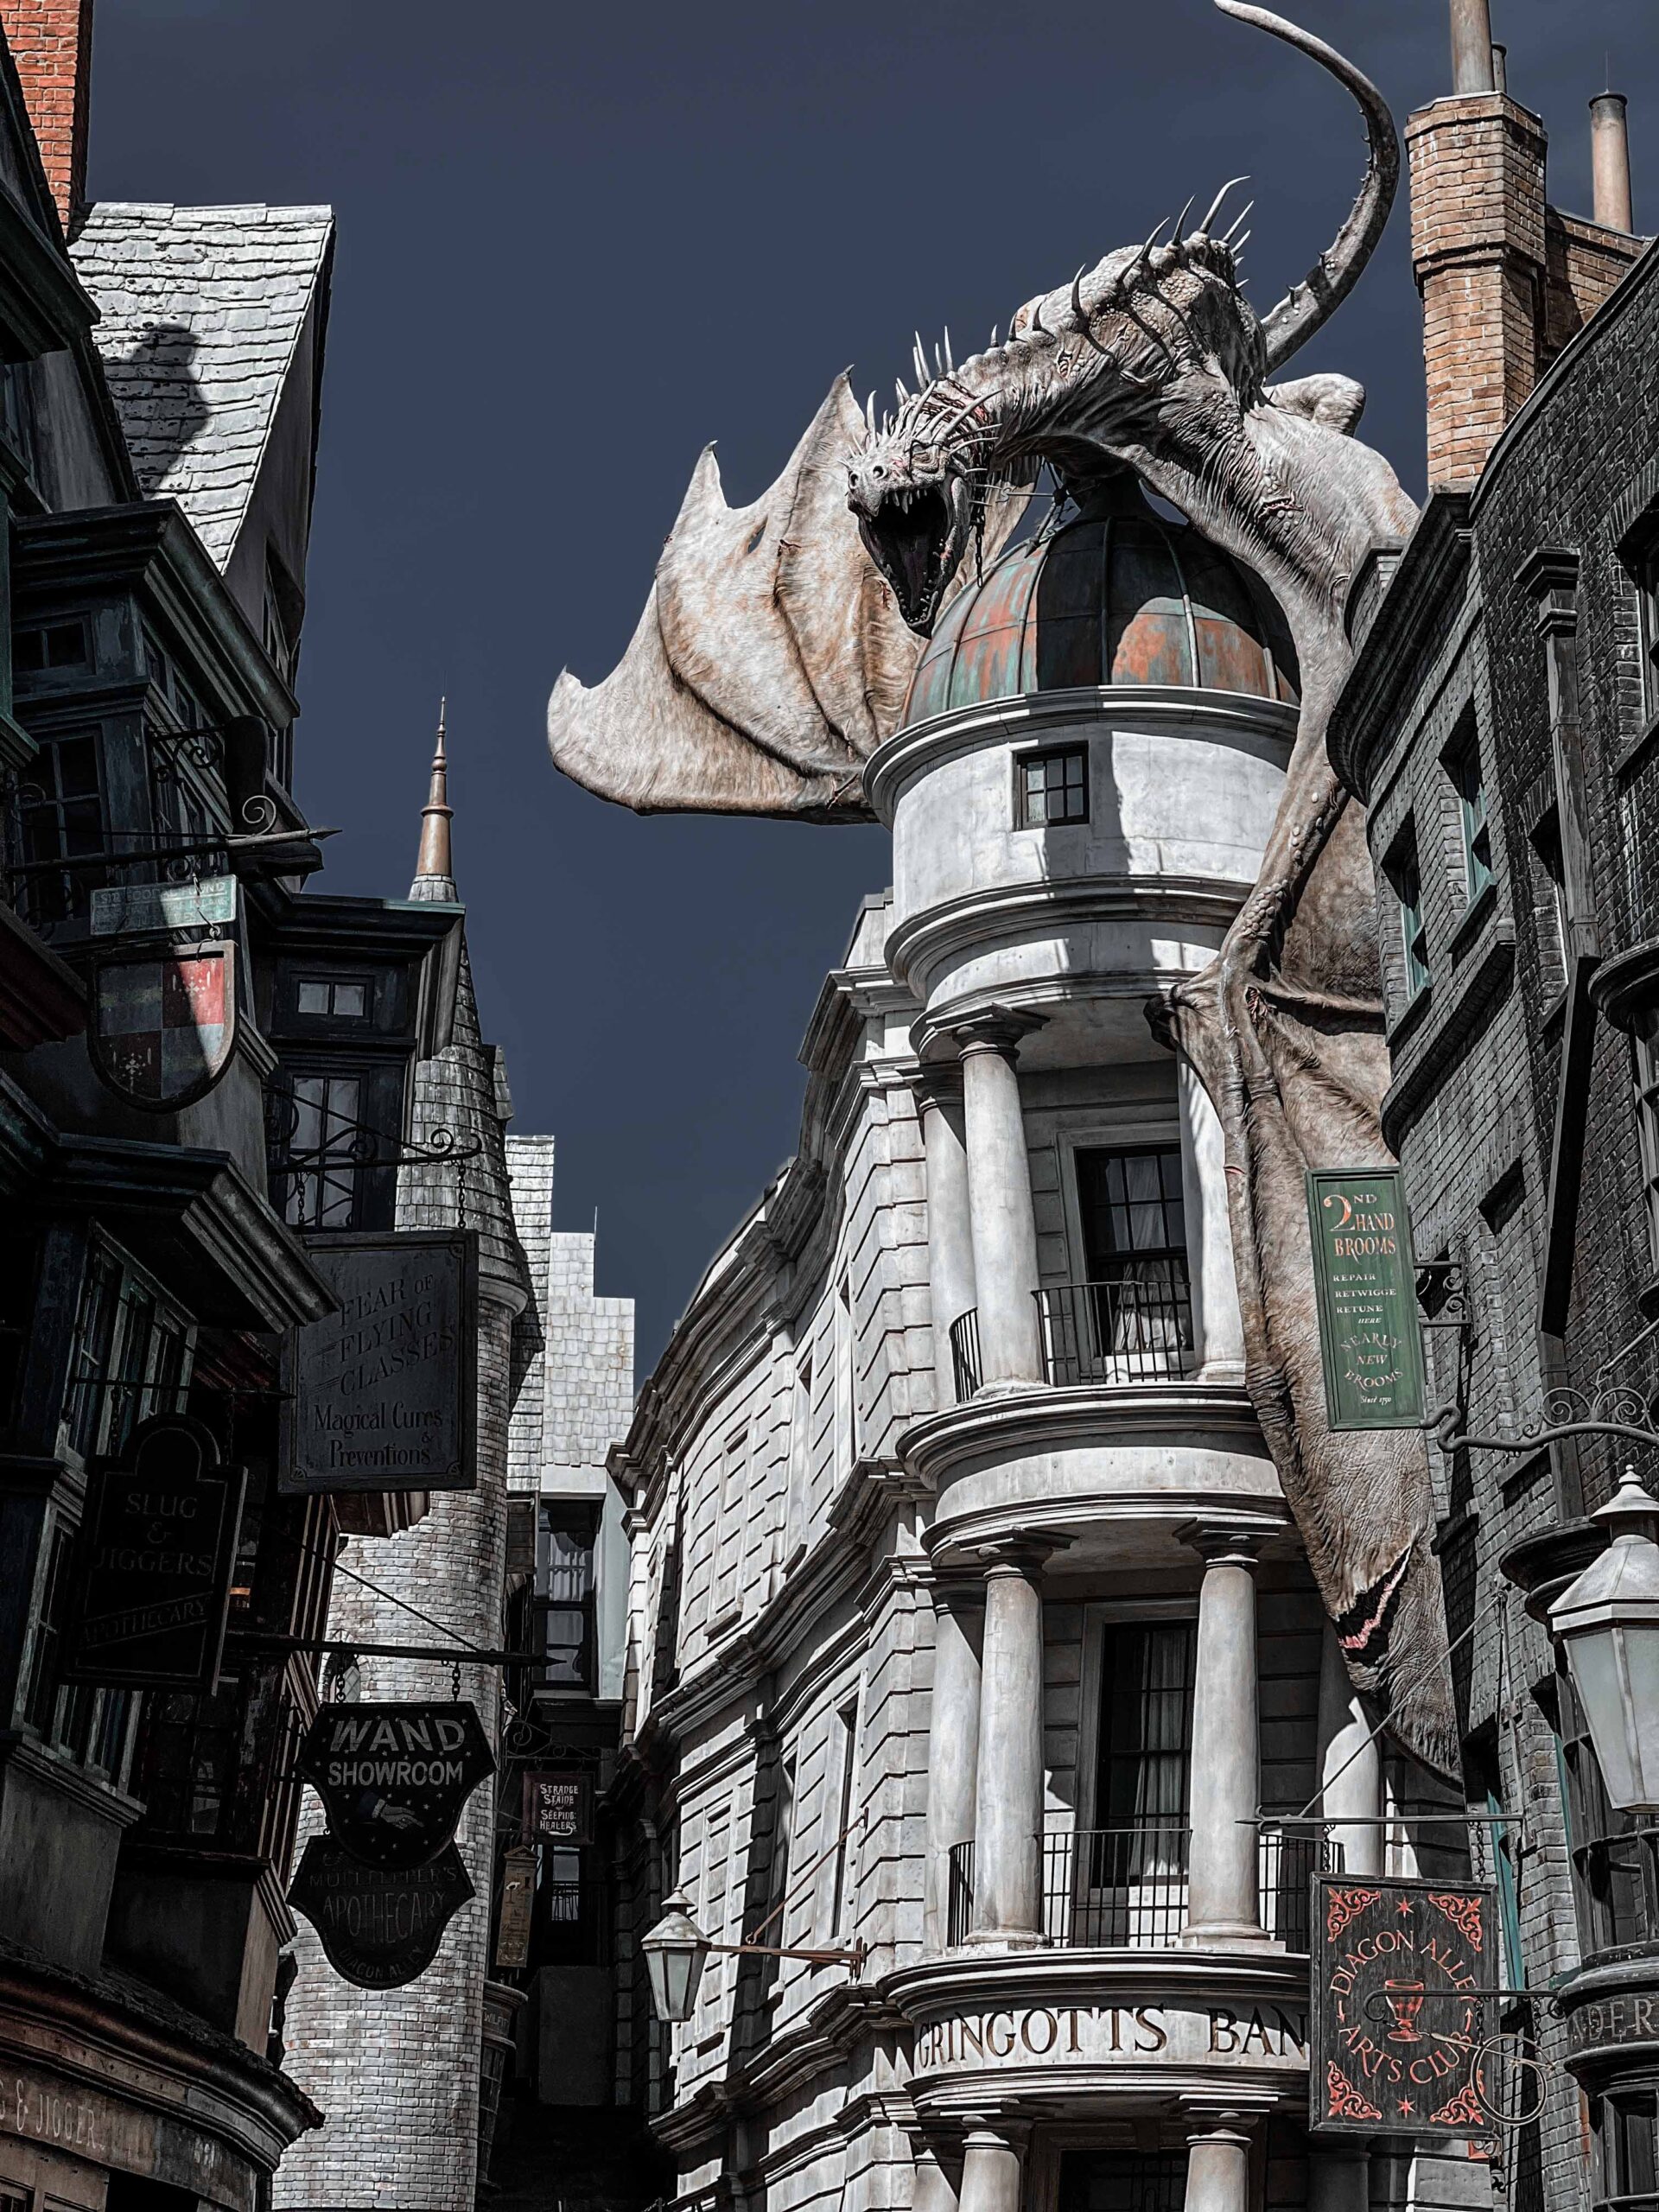 Top 5 Reasons Not To Miss Out On The Wizarding World of Harry Potter